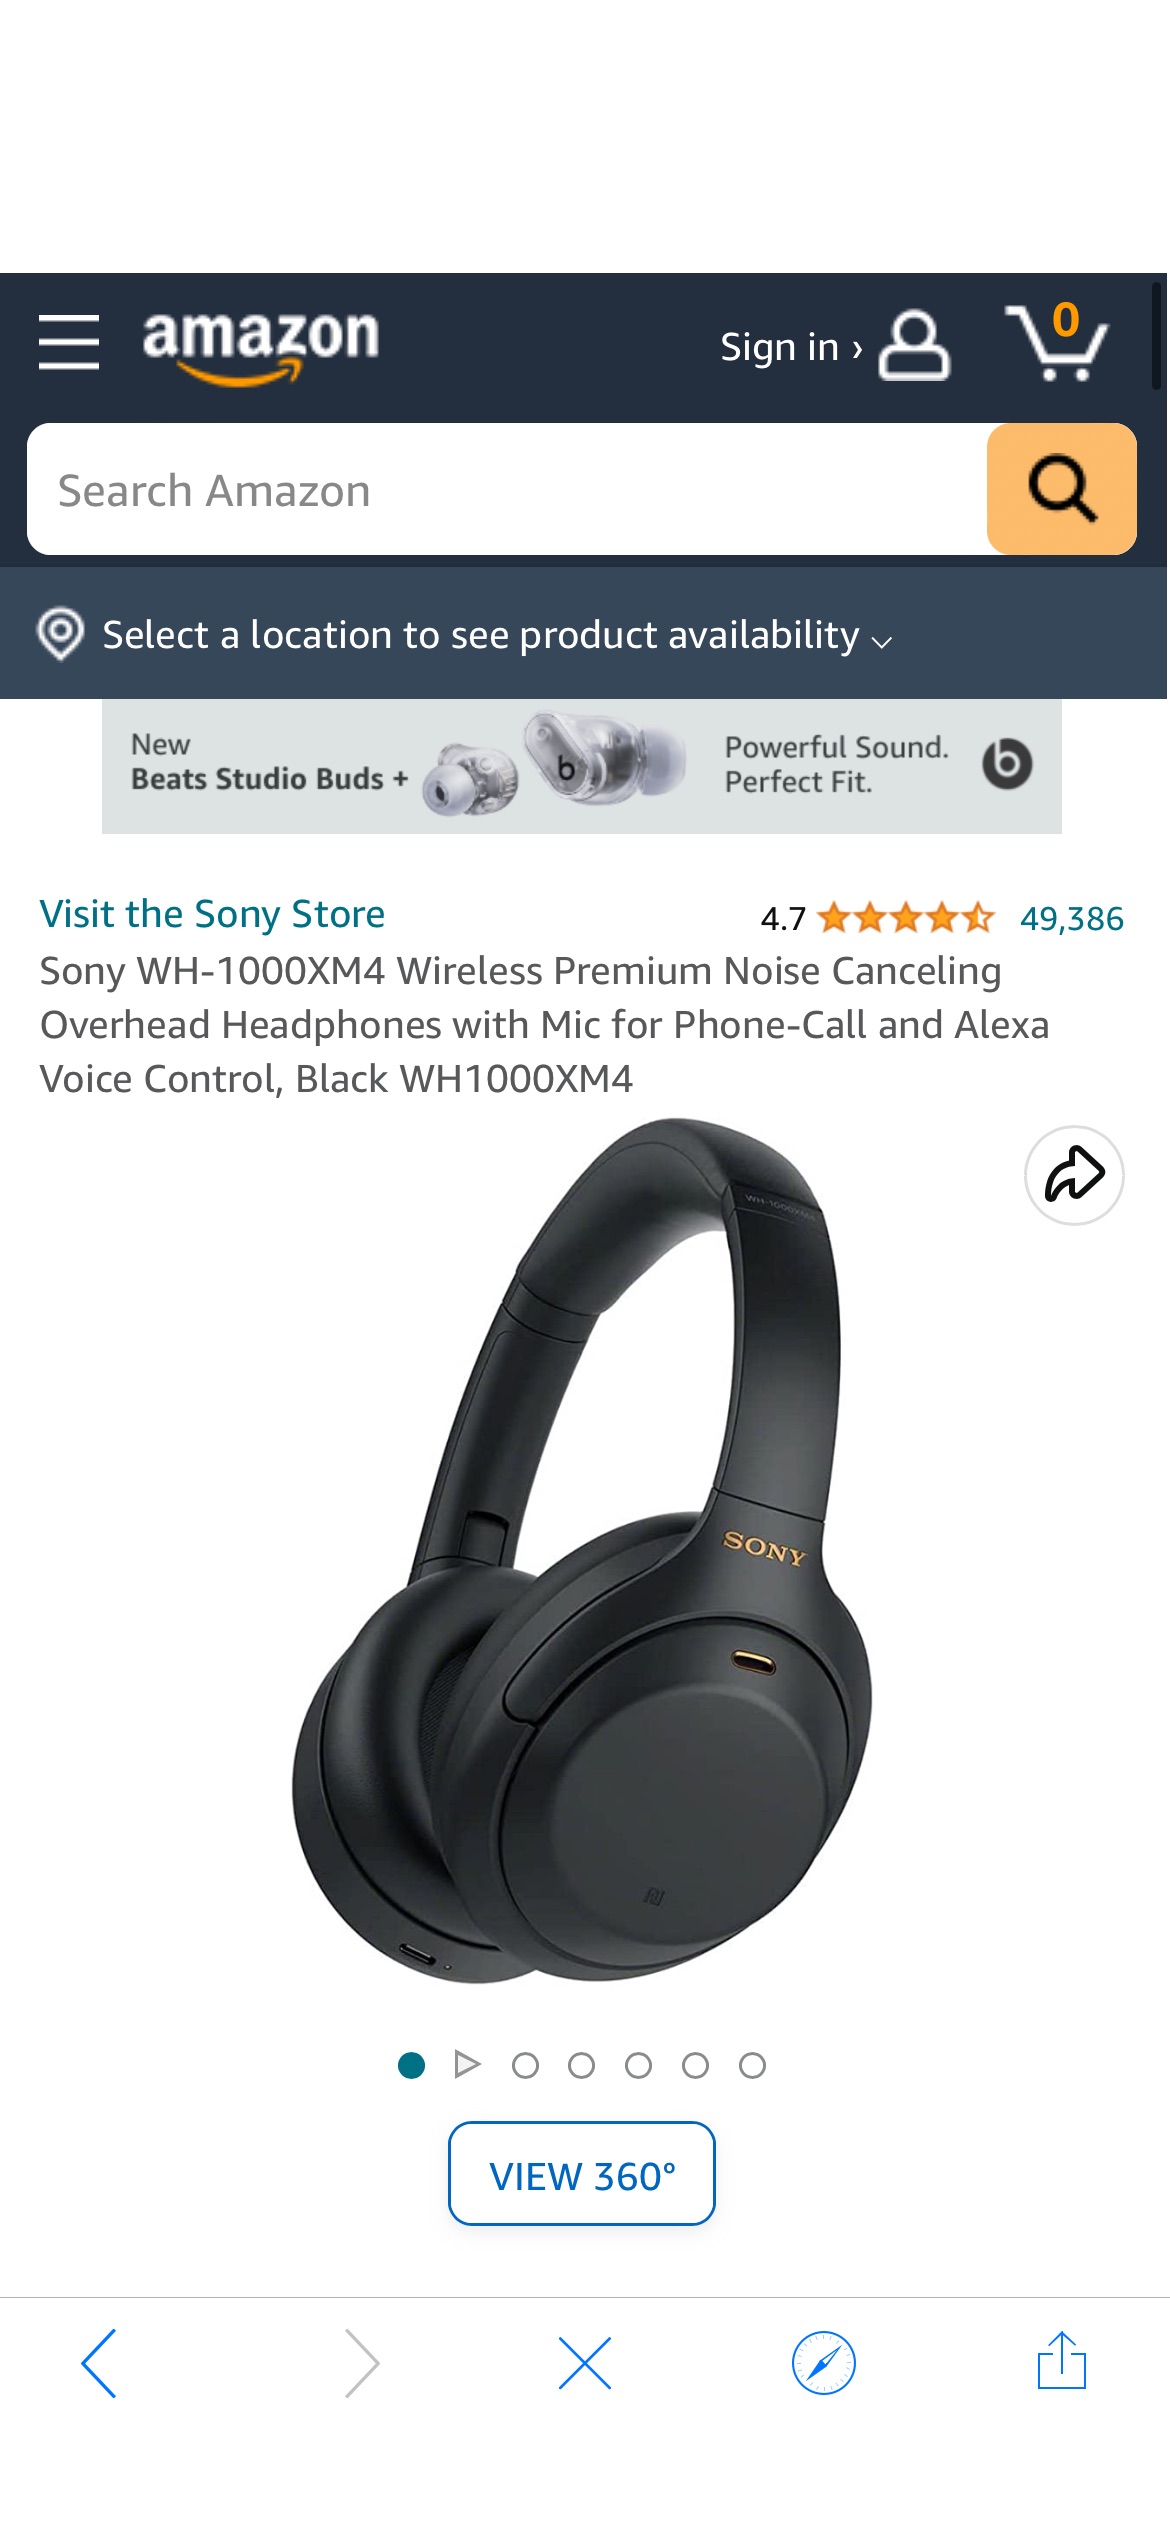 Amazon.com: Sony WH-1000XM4 Wireless Premium Noise Canceling Overhead Headphones with Mic for Phone-Call and Alexa Voice Control, Black WH1000XM4 : Electronics